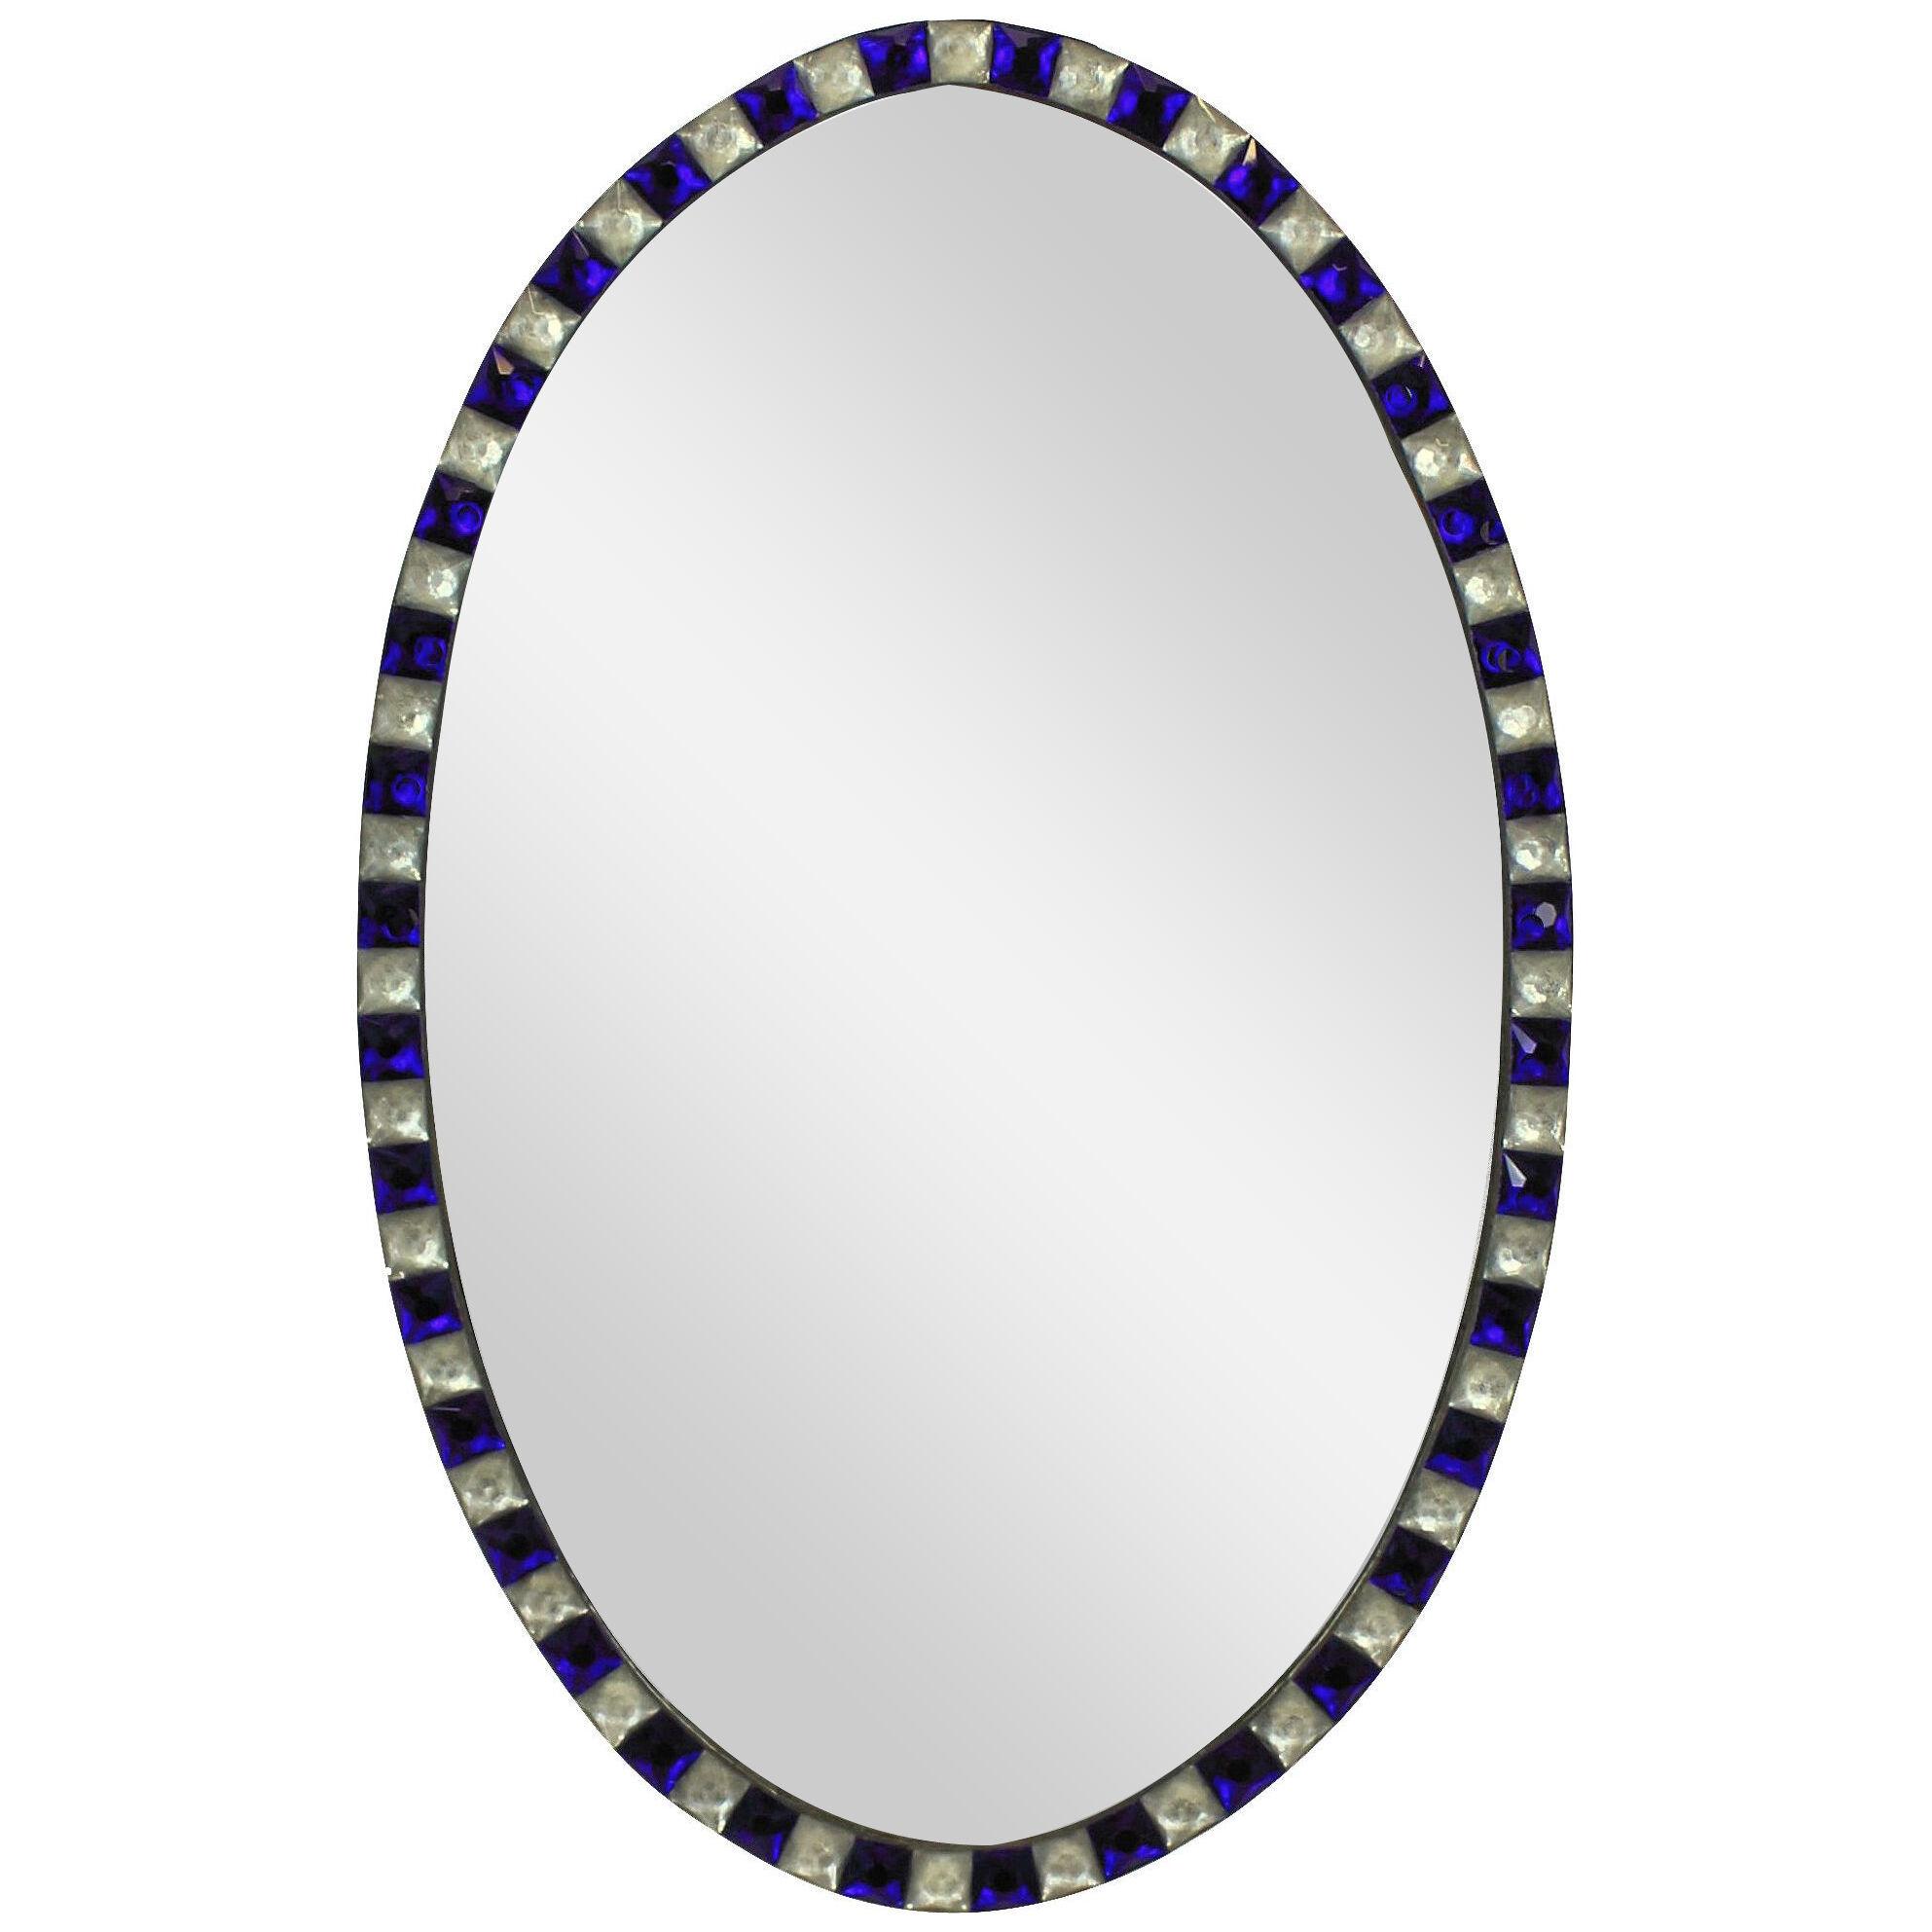 A GEORGIAN STYLE IRISH MIRROR WITH BLUE GLASS & ROCK CRYSTAL FACETED BORDER